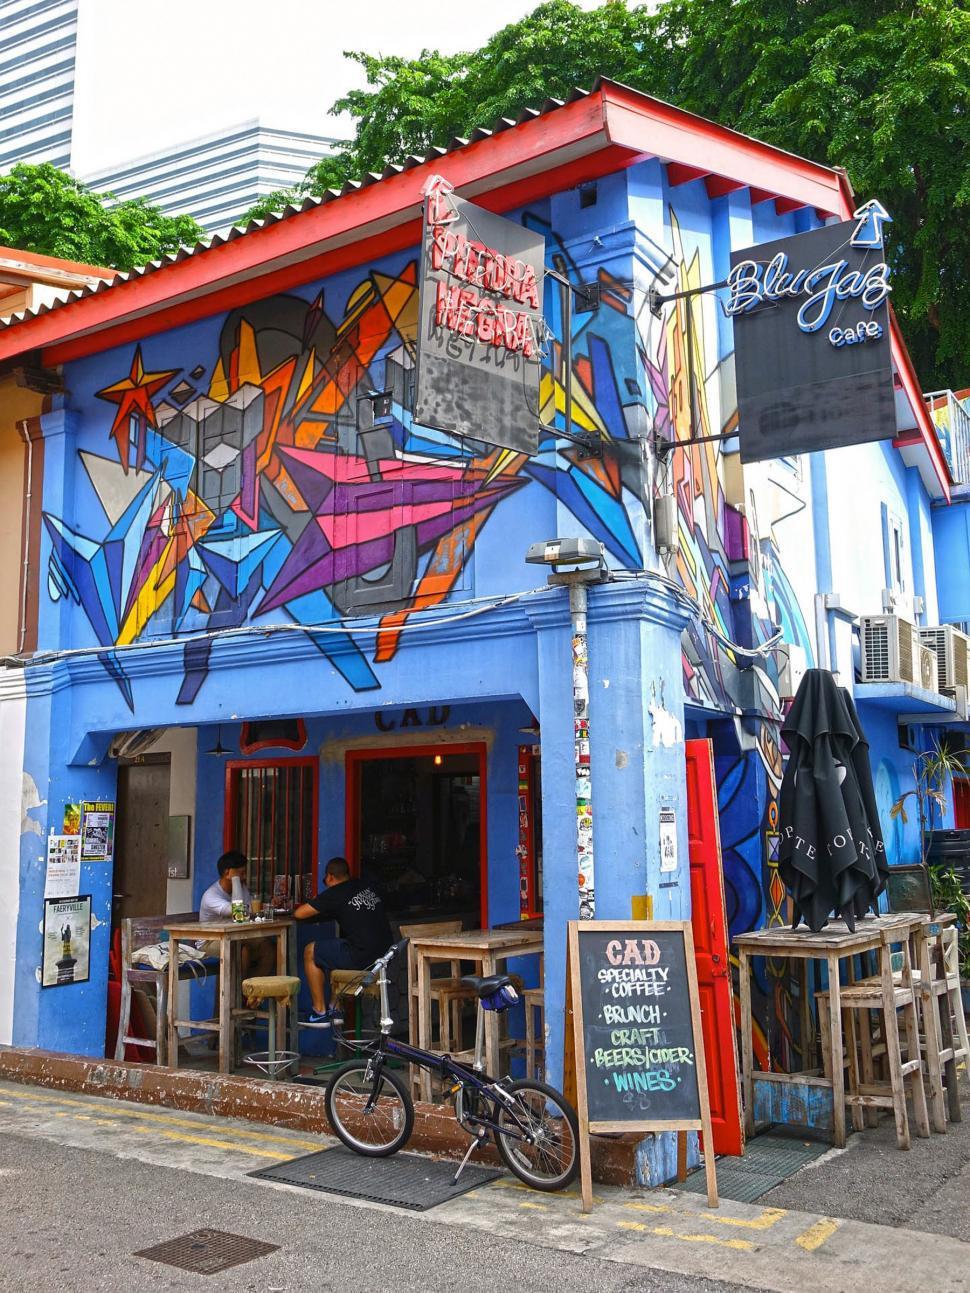 Free Image of Blue Building With Mural on Side 